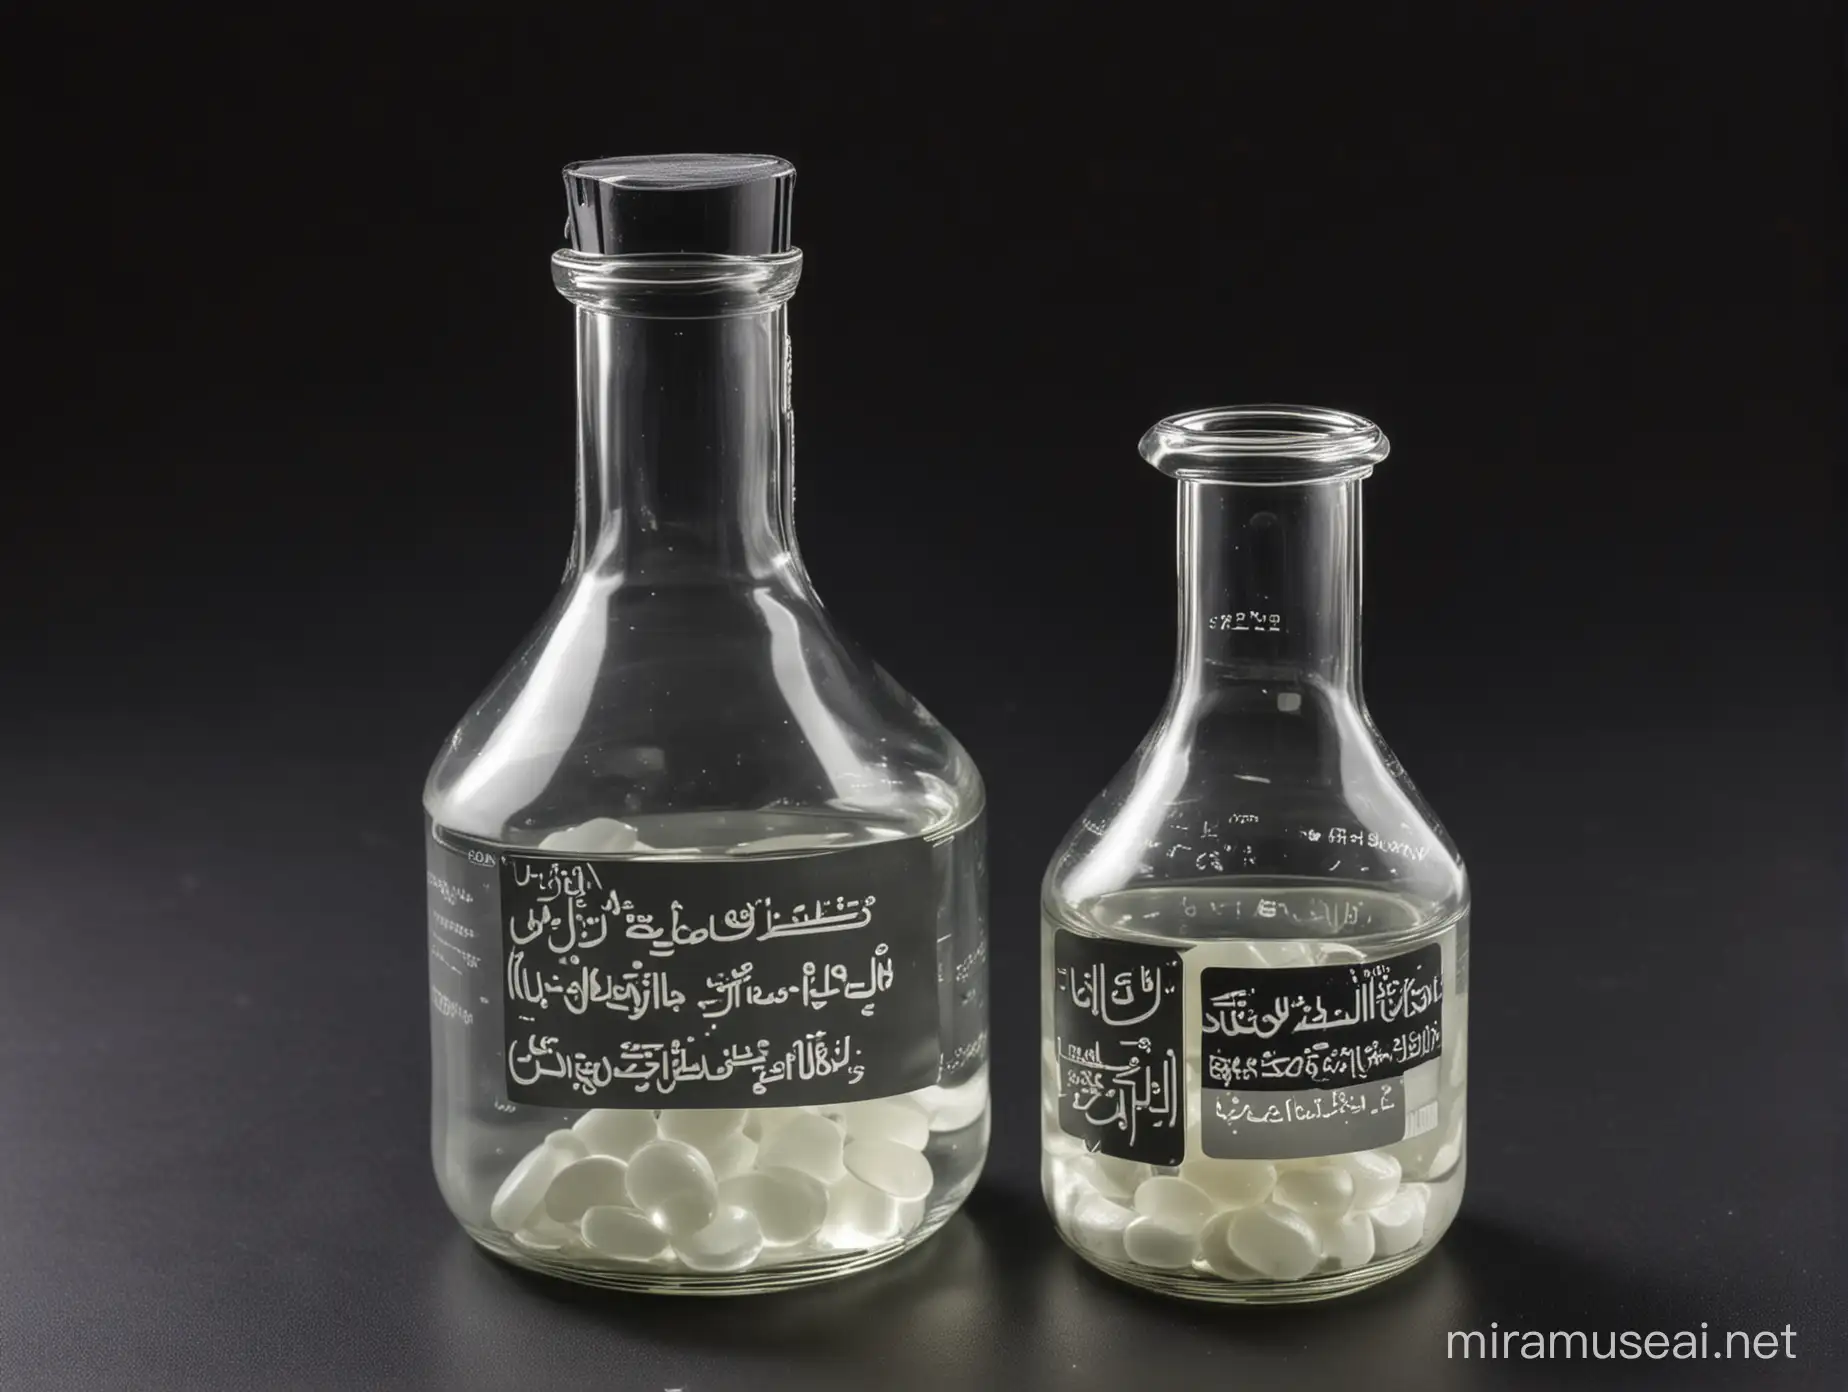 aboratory Glasswares are testing sodium metaoxid , very shiny , with black background, the tags show the materials are approved and ready to dispach in arabic . manufactury name in Borna